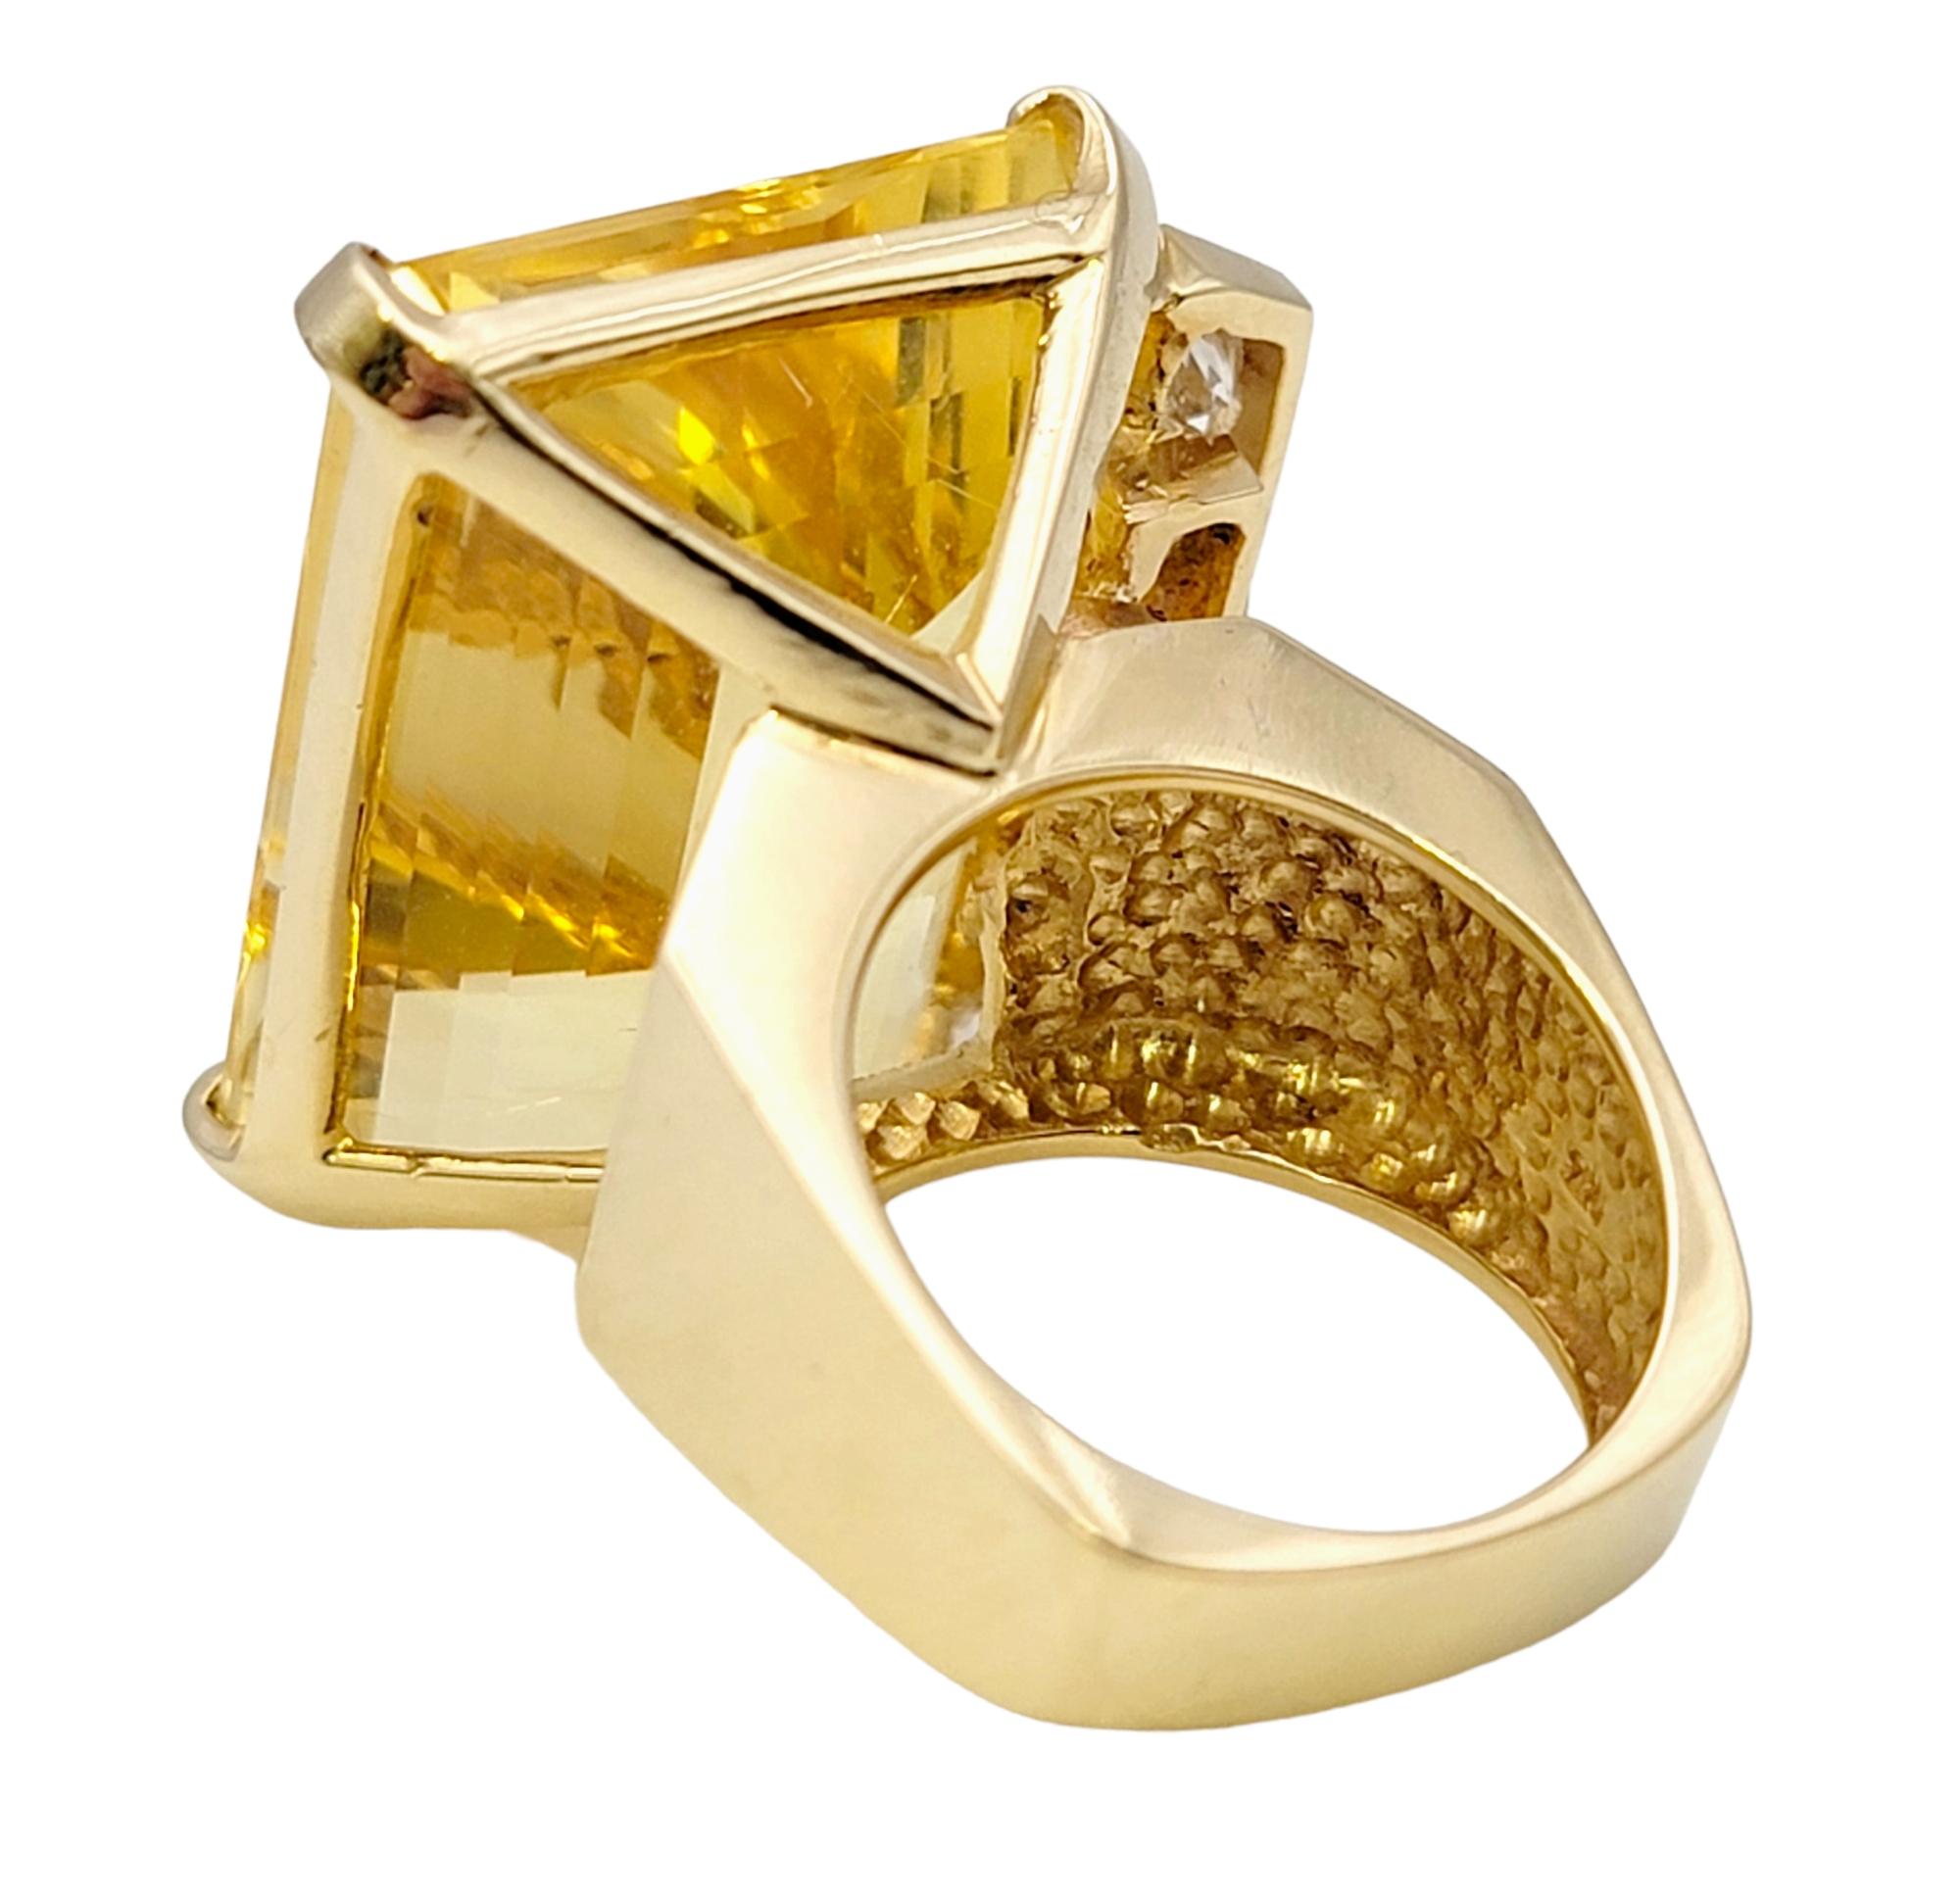 Huge 32.31 Carat Total Emerald Cut Citrine and Diamond Cocktail Ring Yellow Gold For Sale 3